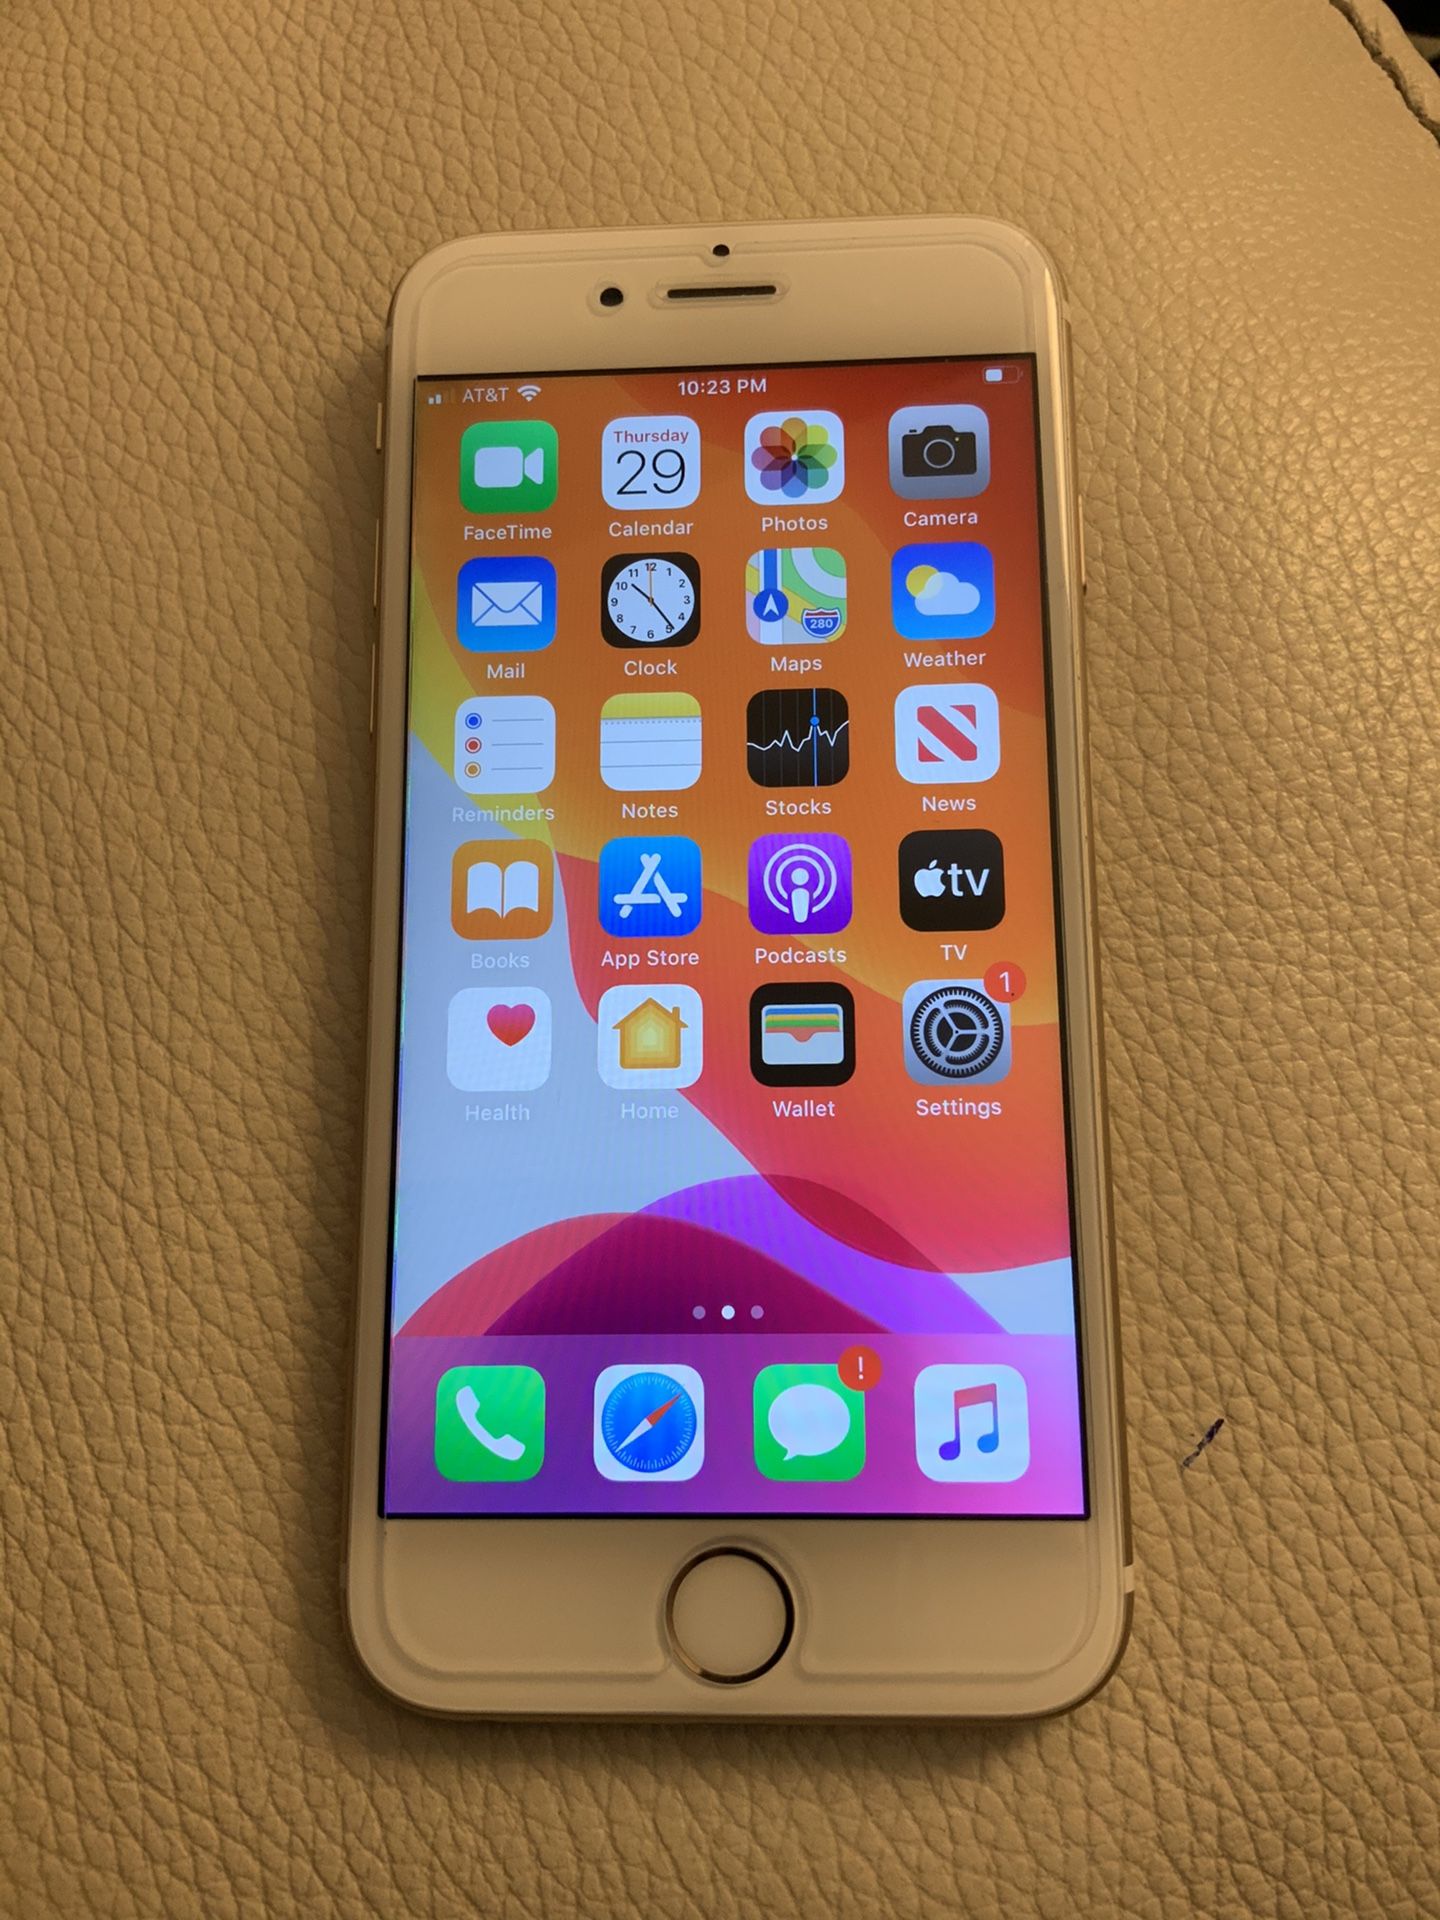 IPhone 6S, 64 GB, in excellent condition unlocked AT&T Carrier.